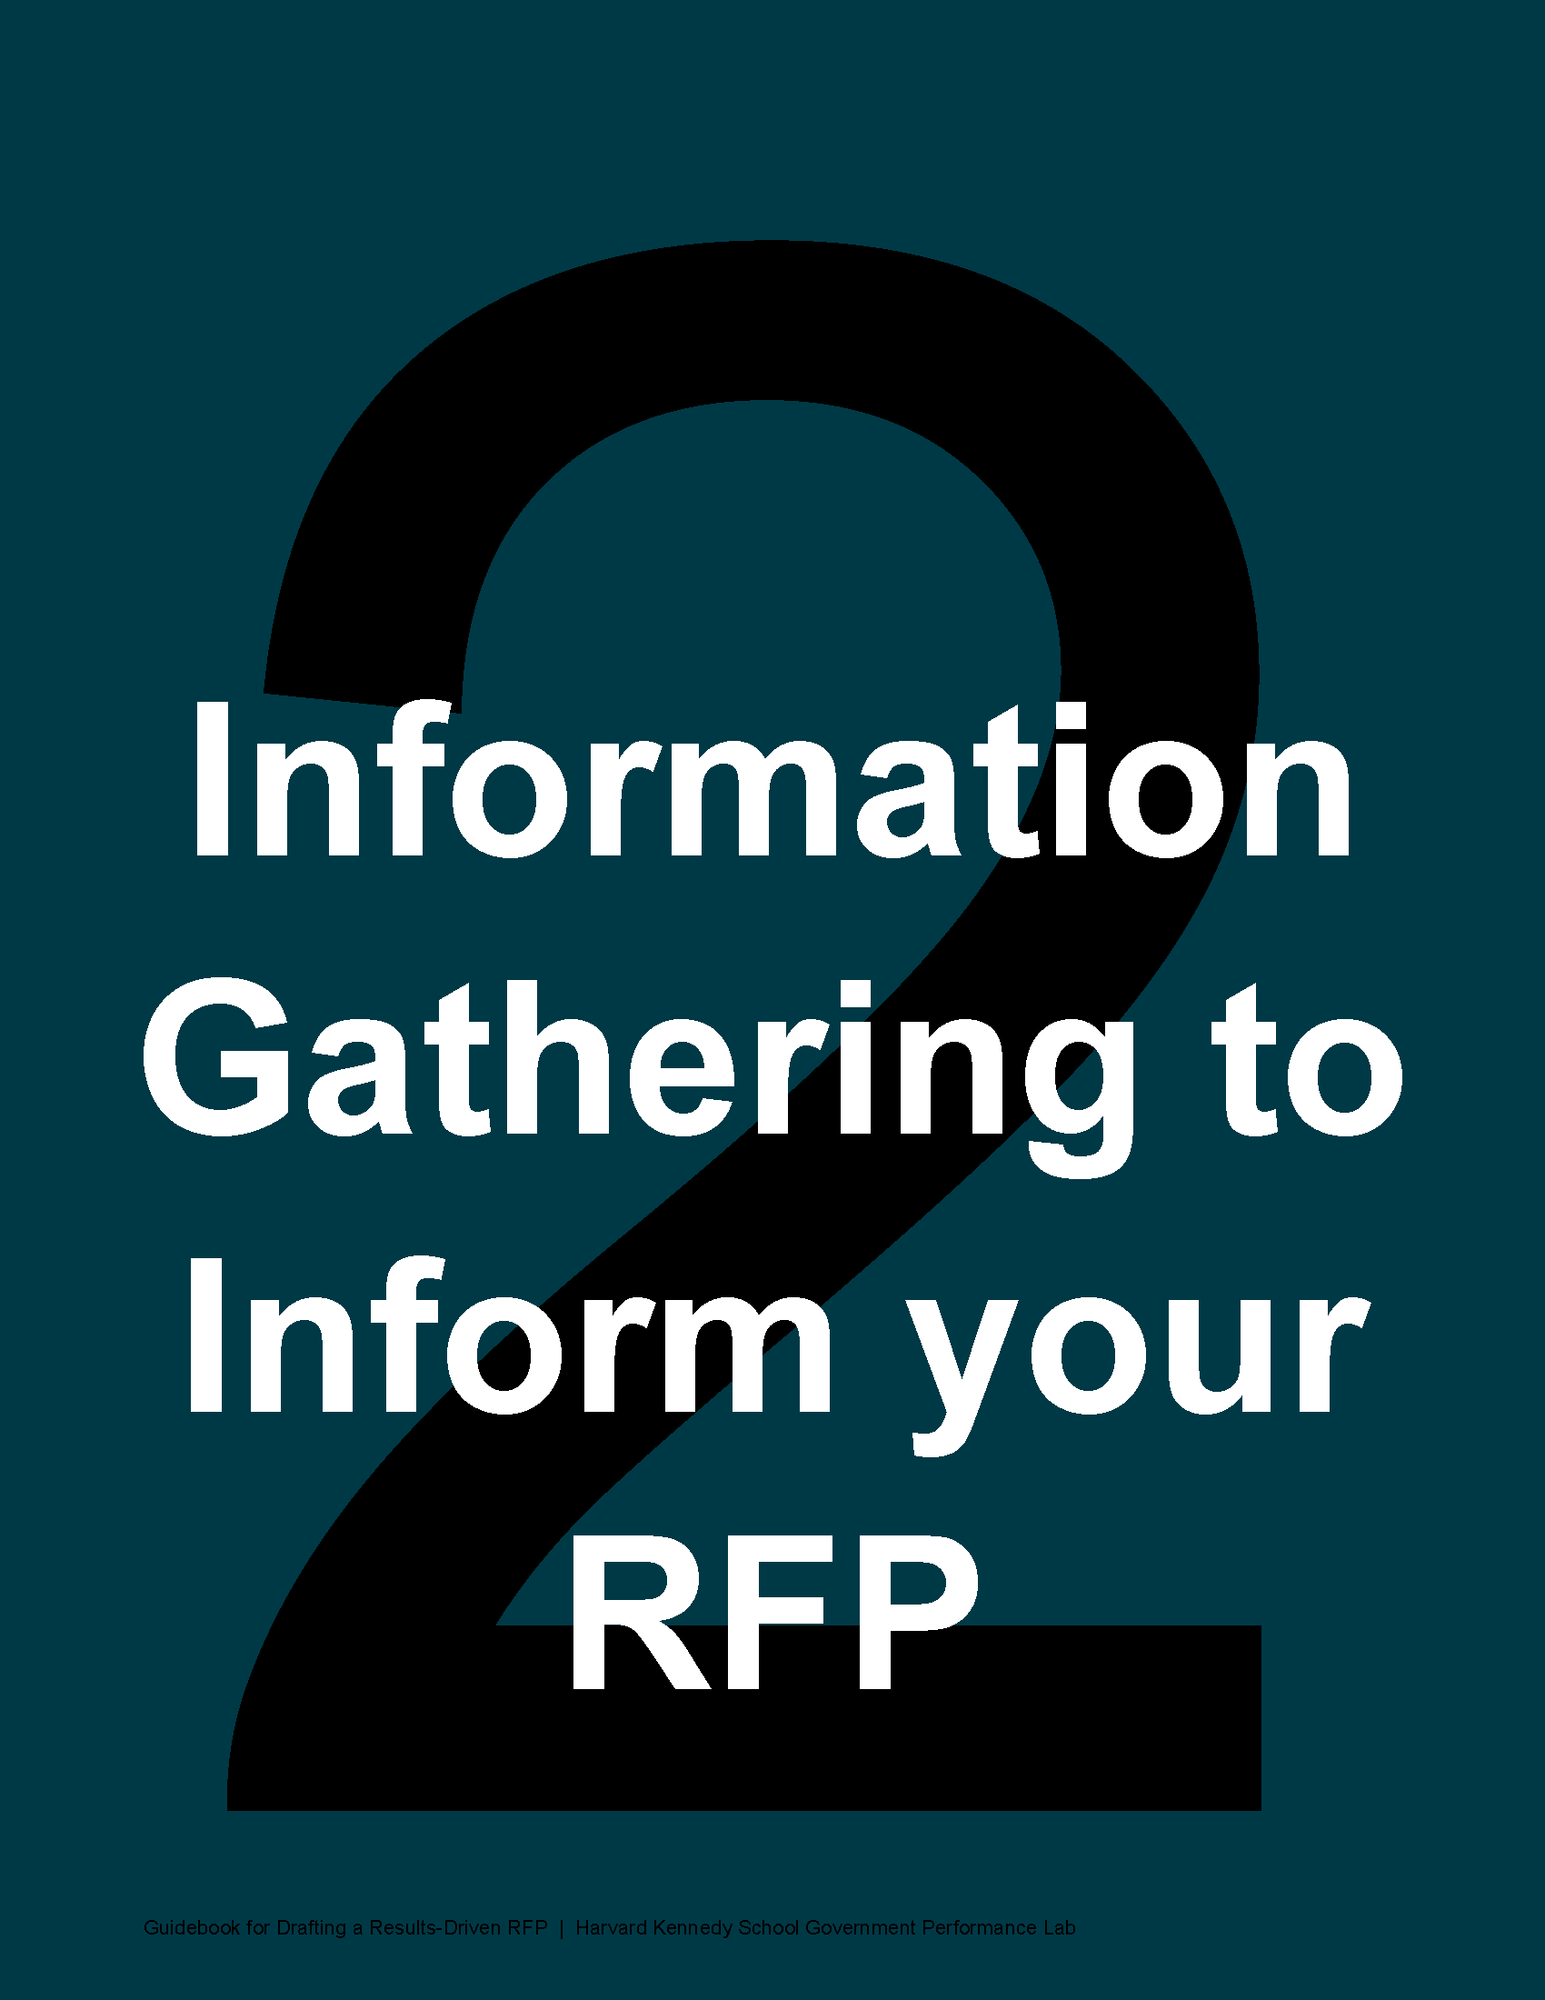 Information Gathering to Inform Your RFP